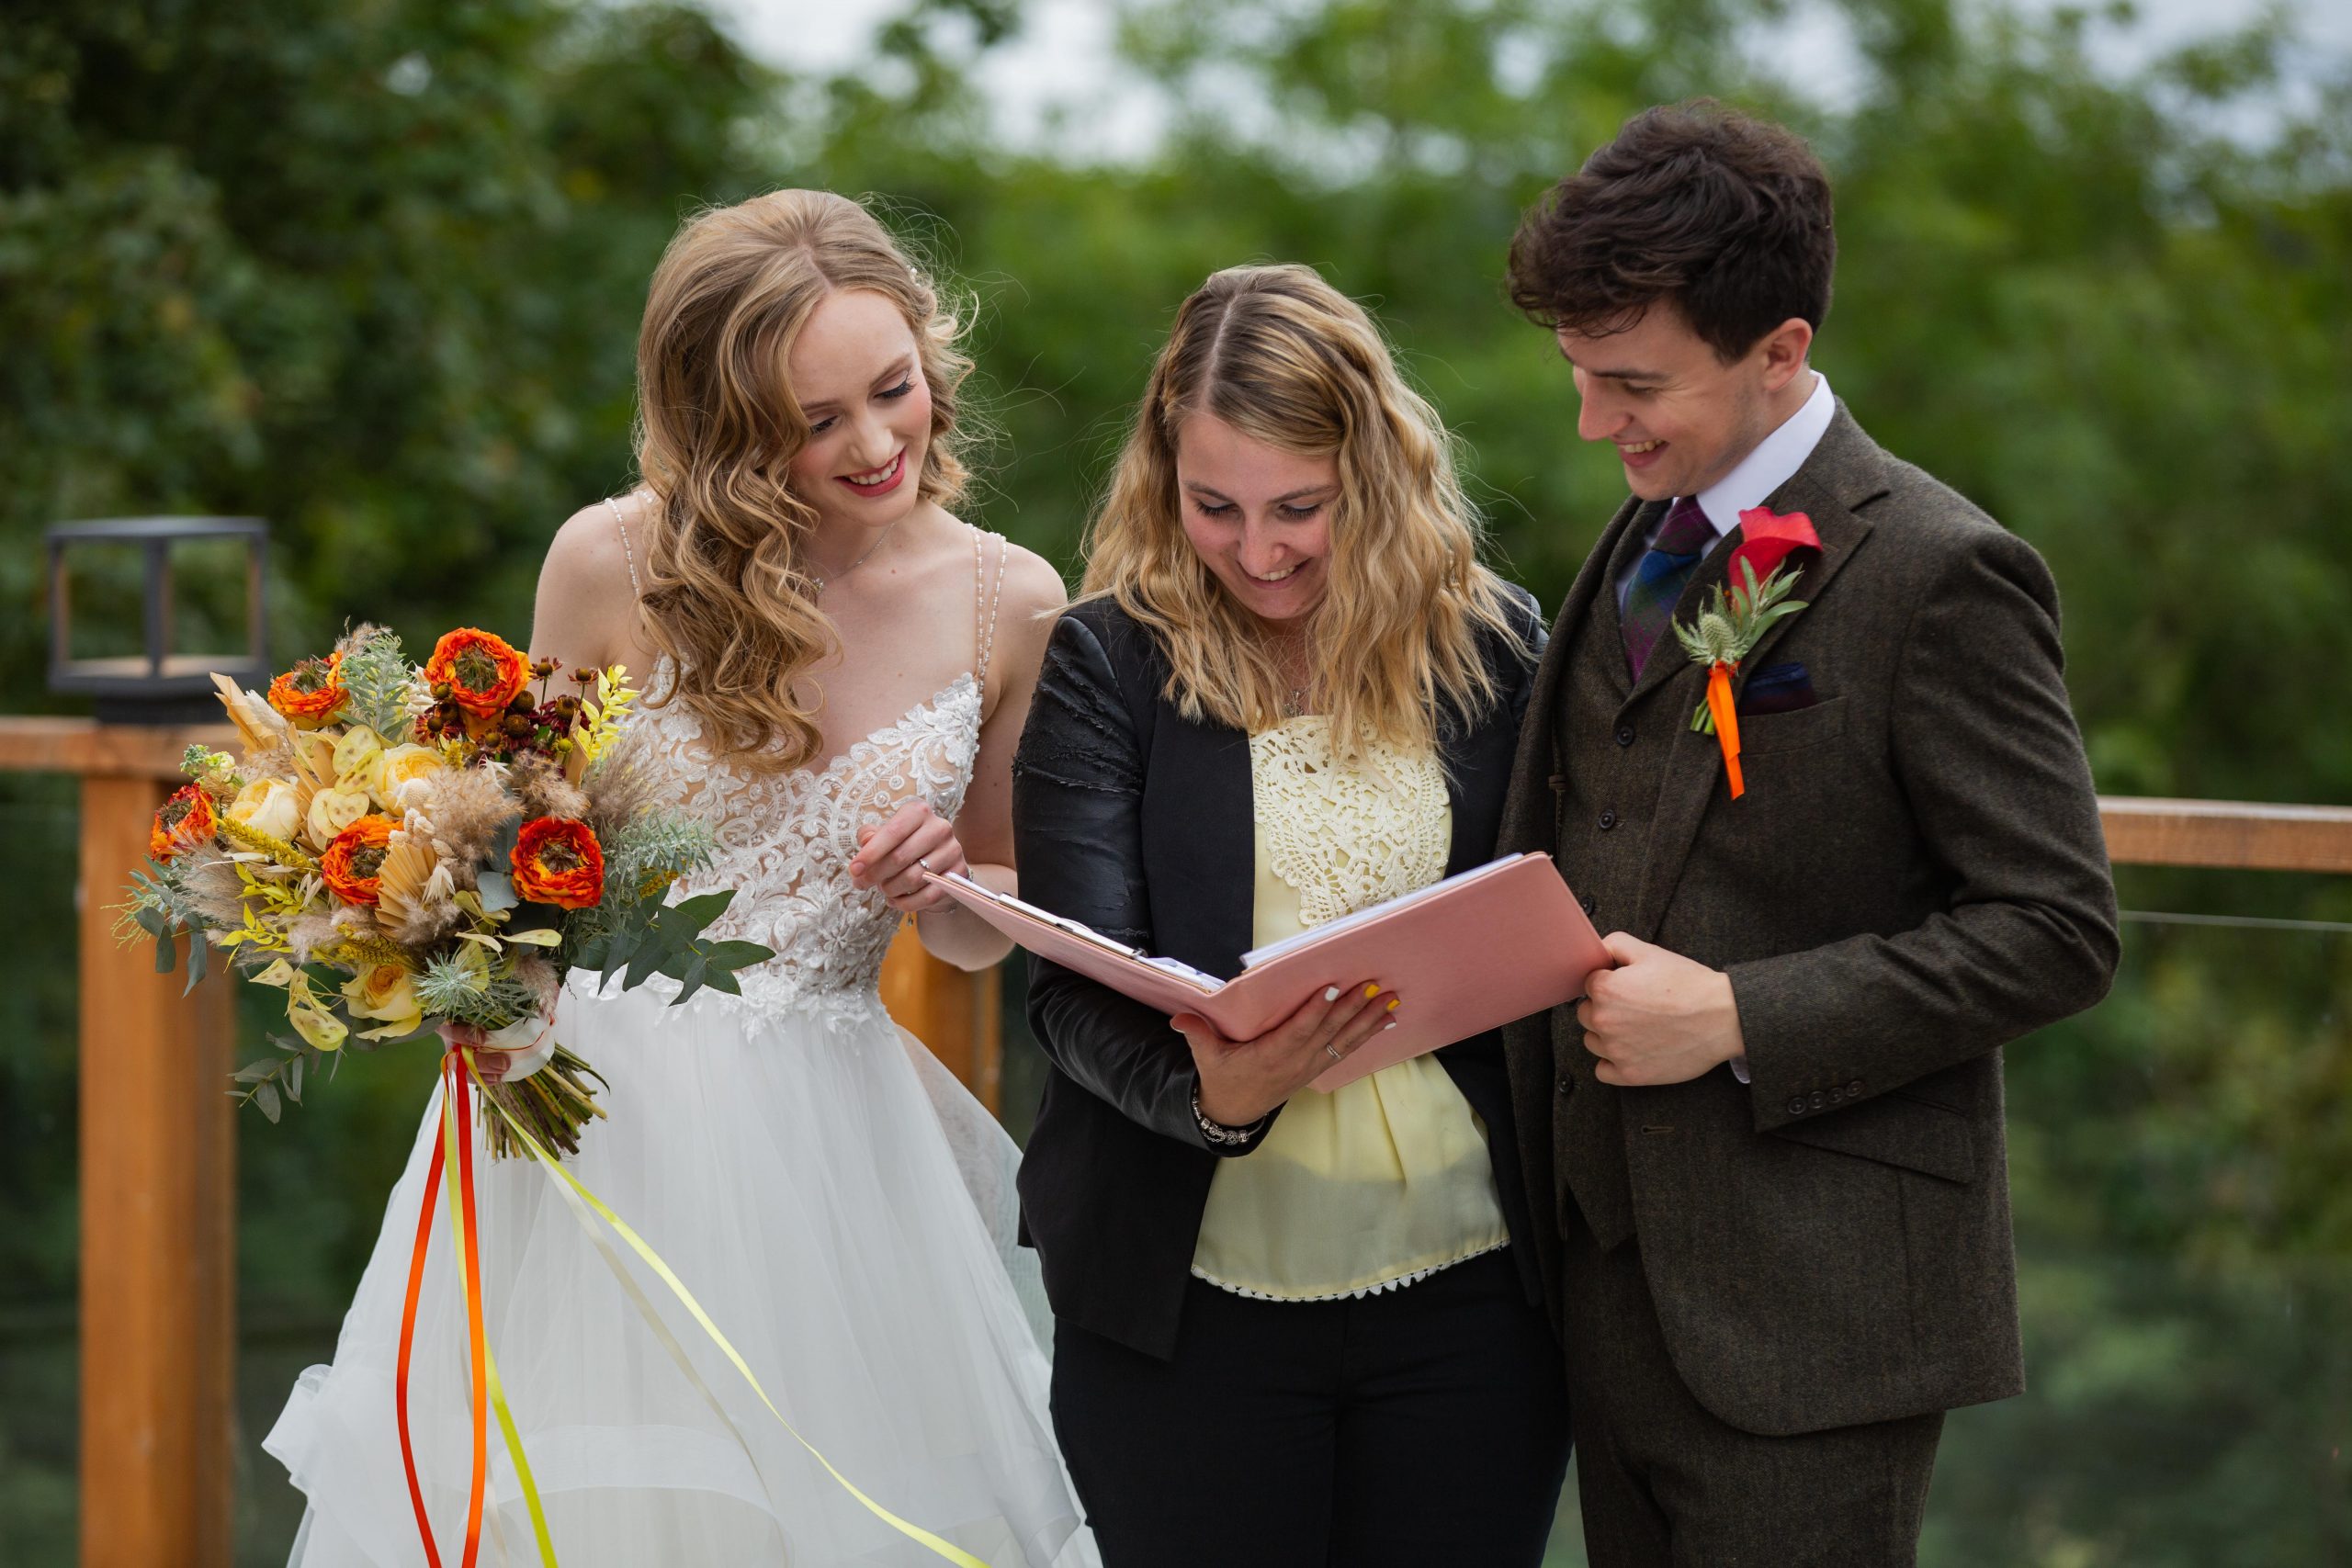 Savannah from Mademoiselle Wedding - Your Wedding Planner in Scotland - with a couple during a wedding